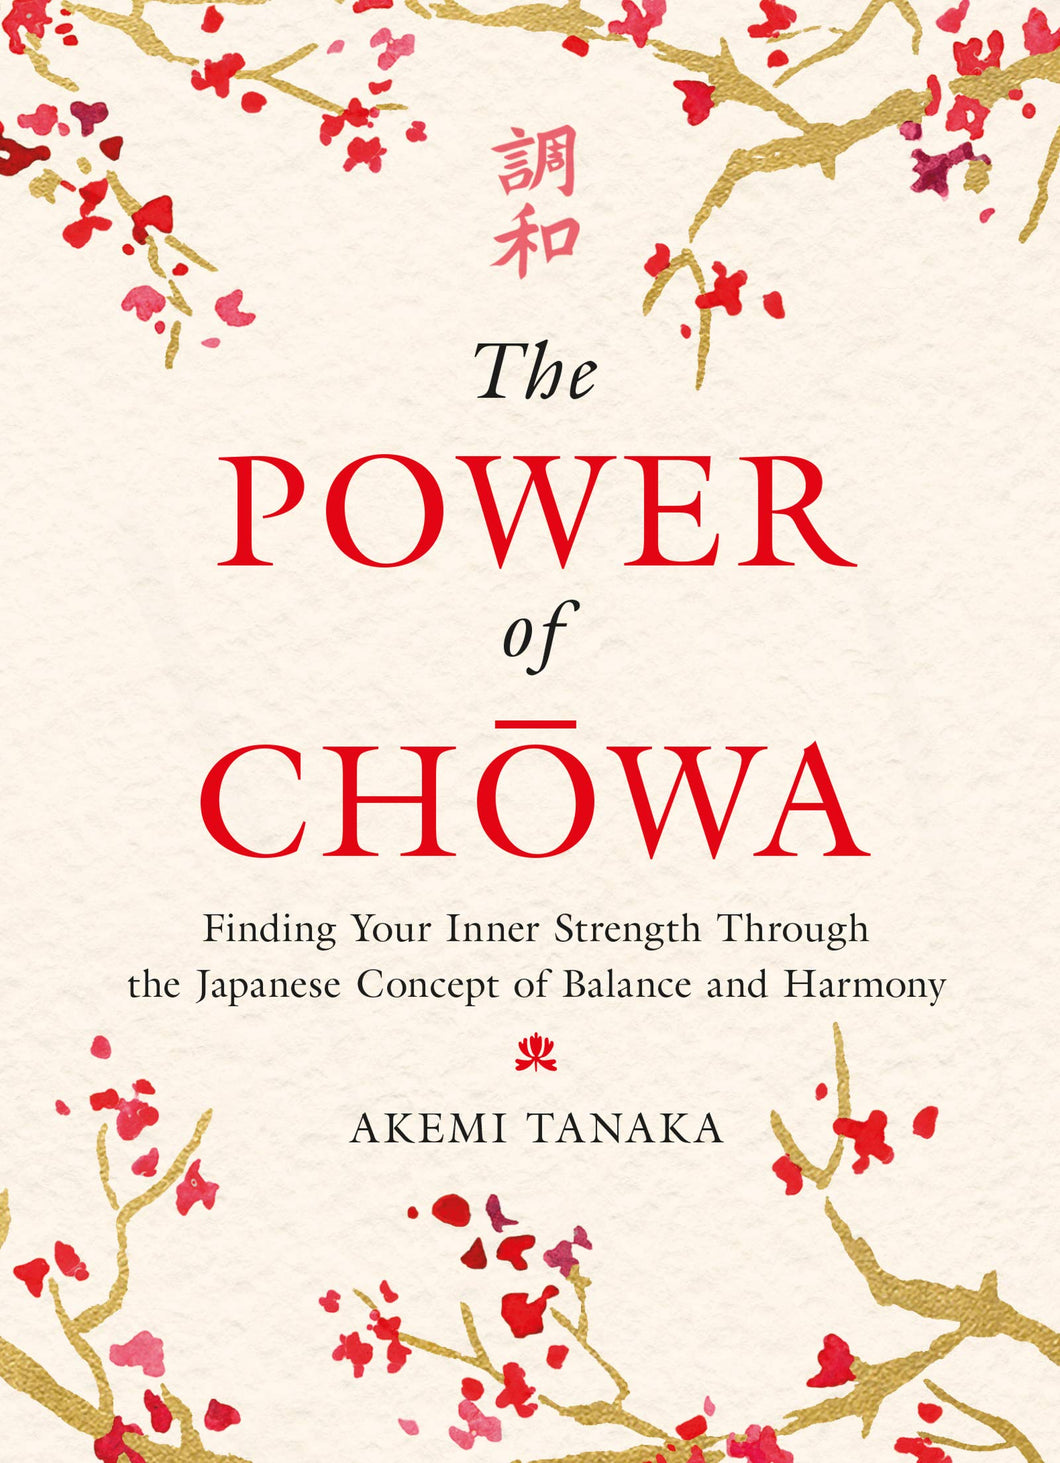 The Power of Chowa: Finding Your Inner Strength Through the Japanese Concept of Balance and Harmony [Akemi Tanaka]